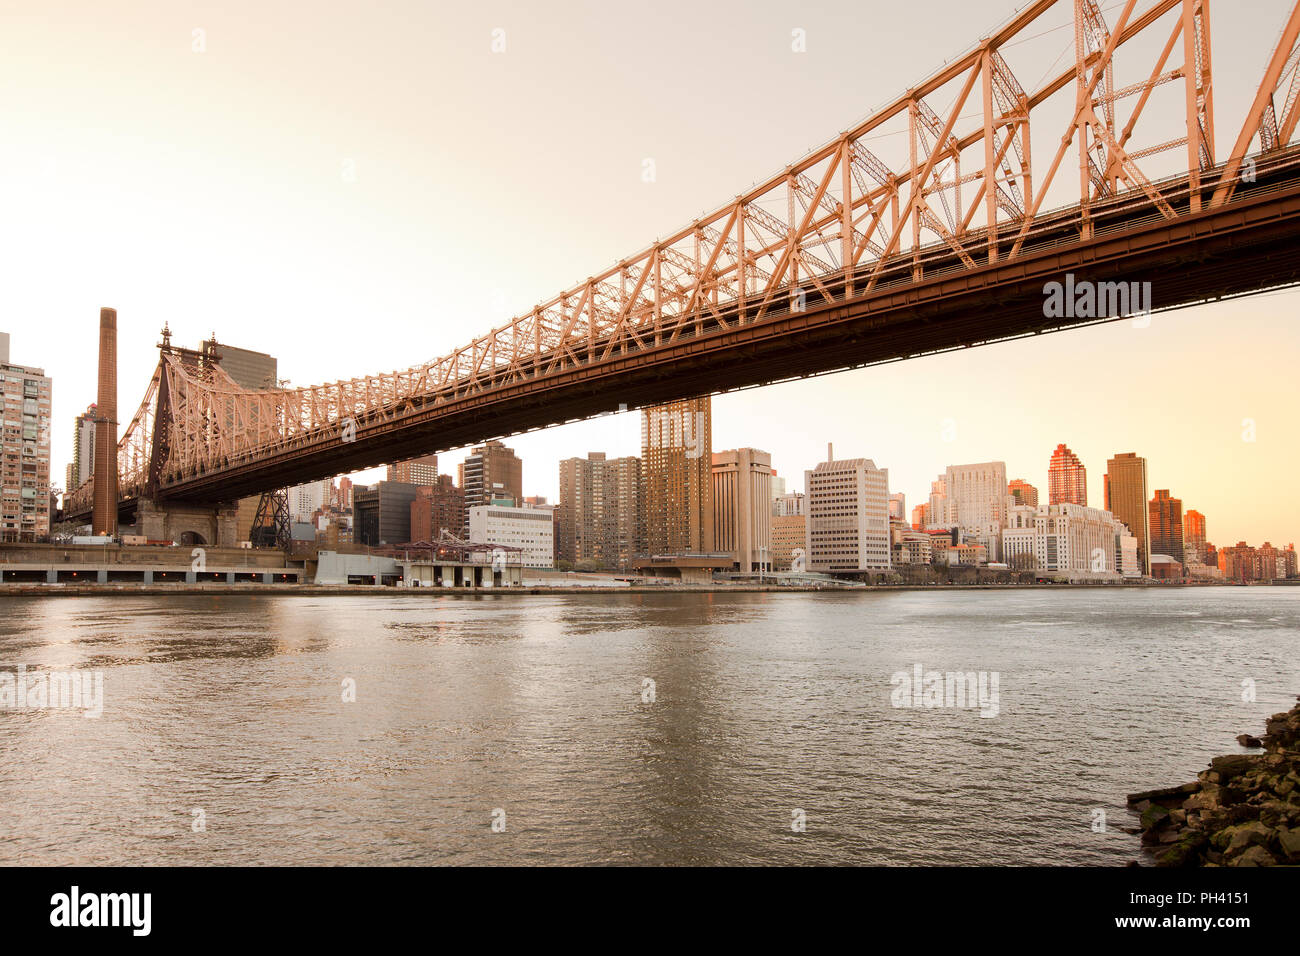 Queensboro Bridge over the East River and Upper East Side, Manhattan, New York City, NY, USA Stock Photo